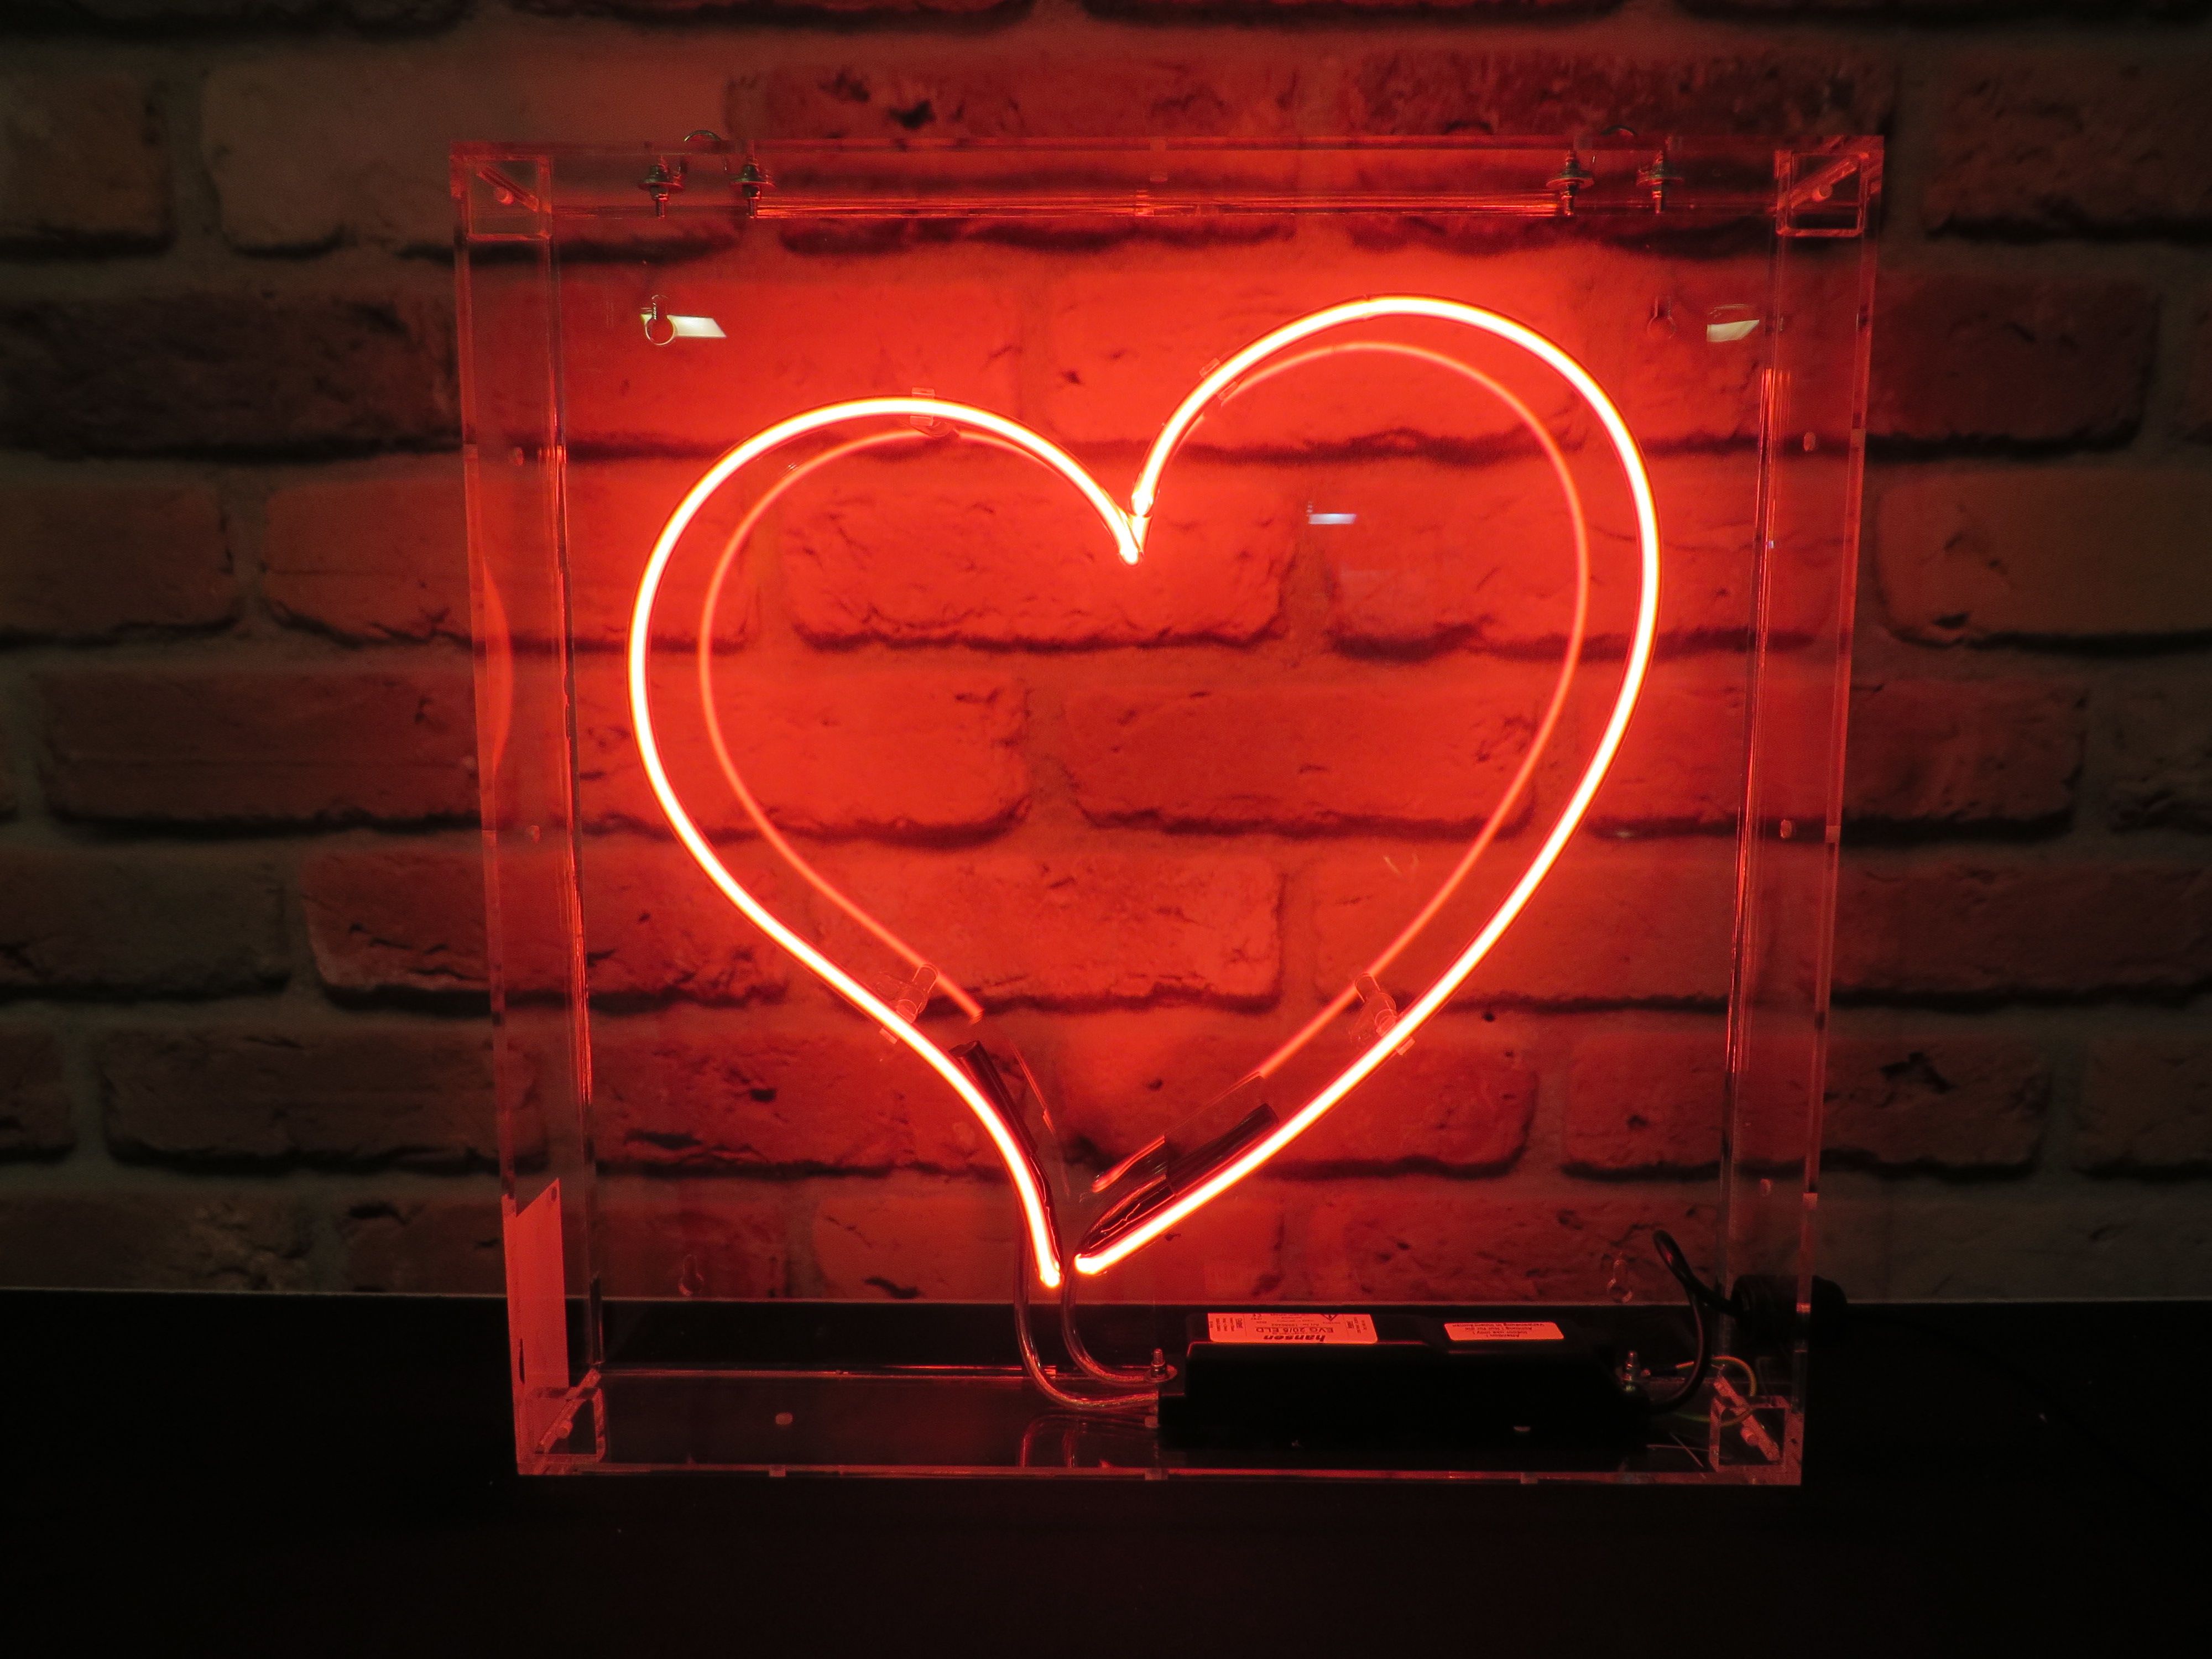 Red heart' neon sign for hire | Moon | Pinterest | Neon and Truths